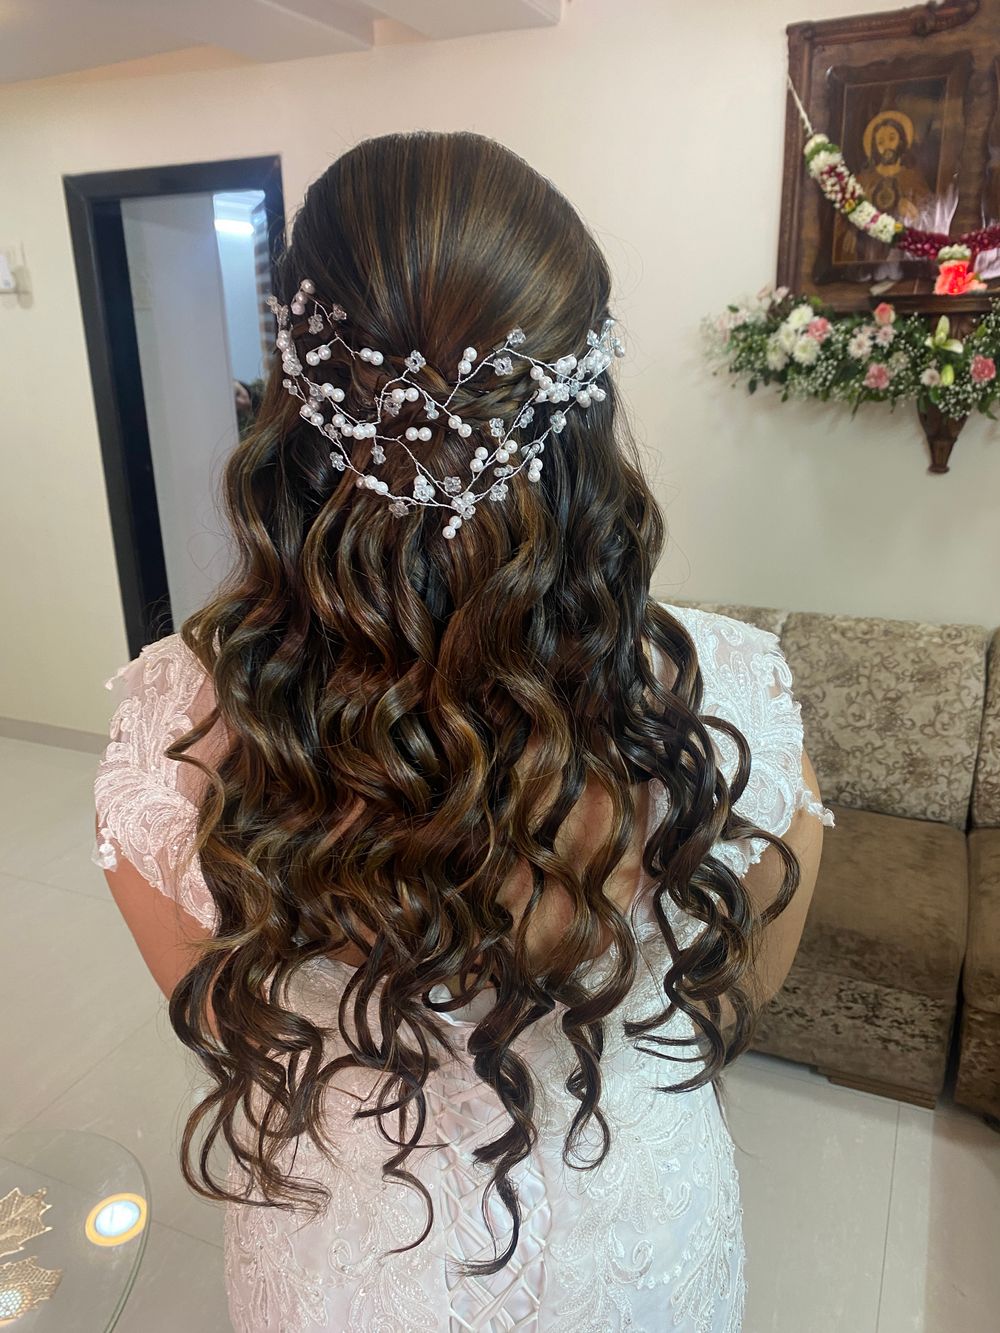 Photo From Hairstyling  - By bridesbyjacqueline